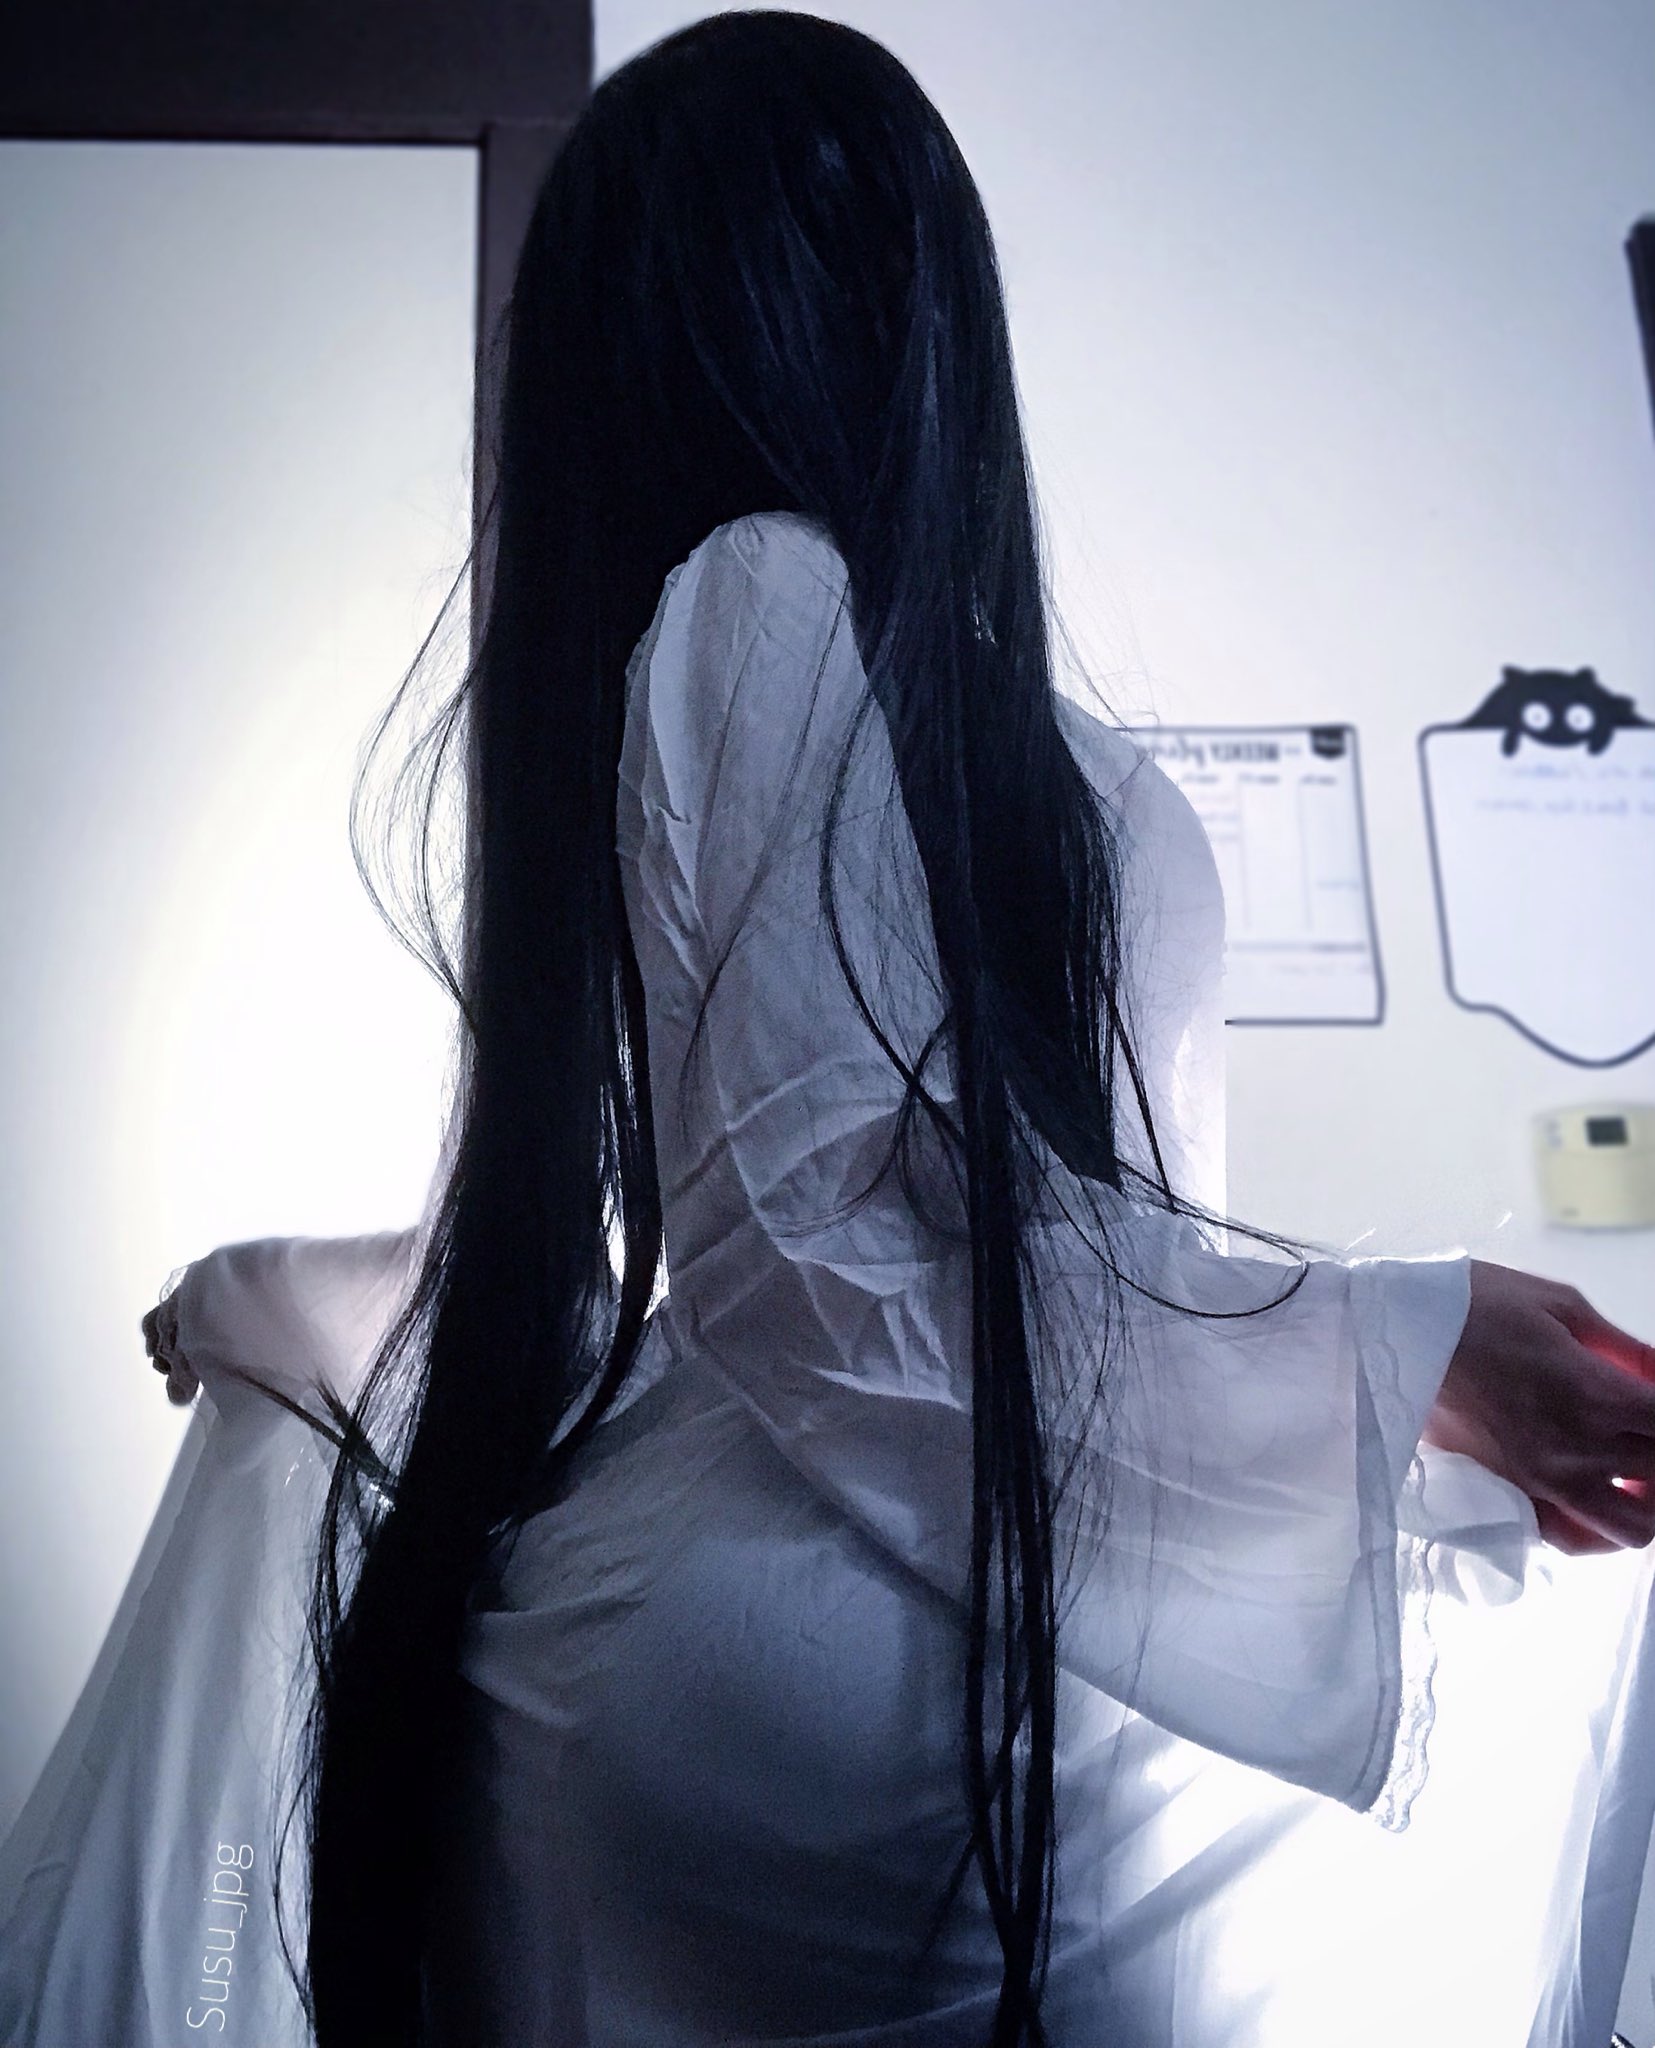 People 1655x2048 07-ghost dark hair Random Access Memories white shirt cosplay long hair portrait display standing pulling clothing arched back white clothing